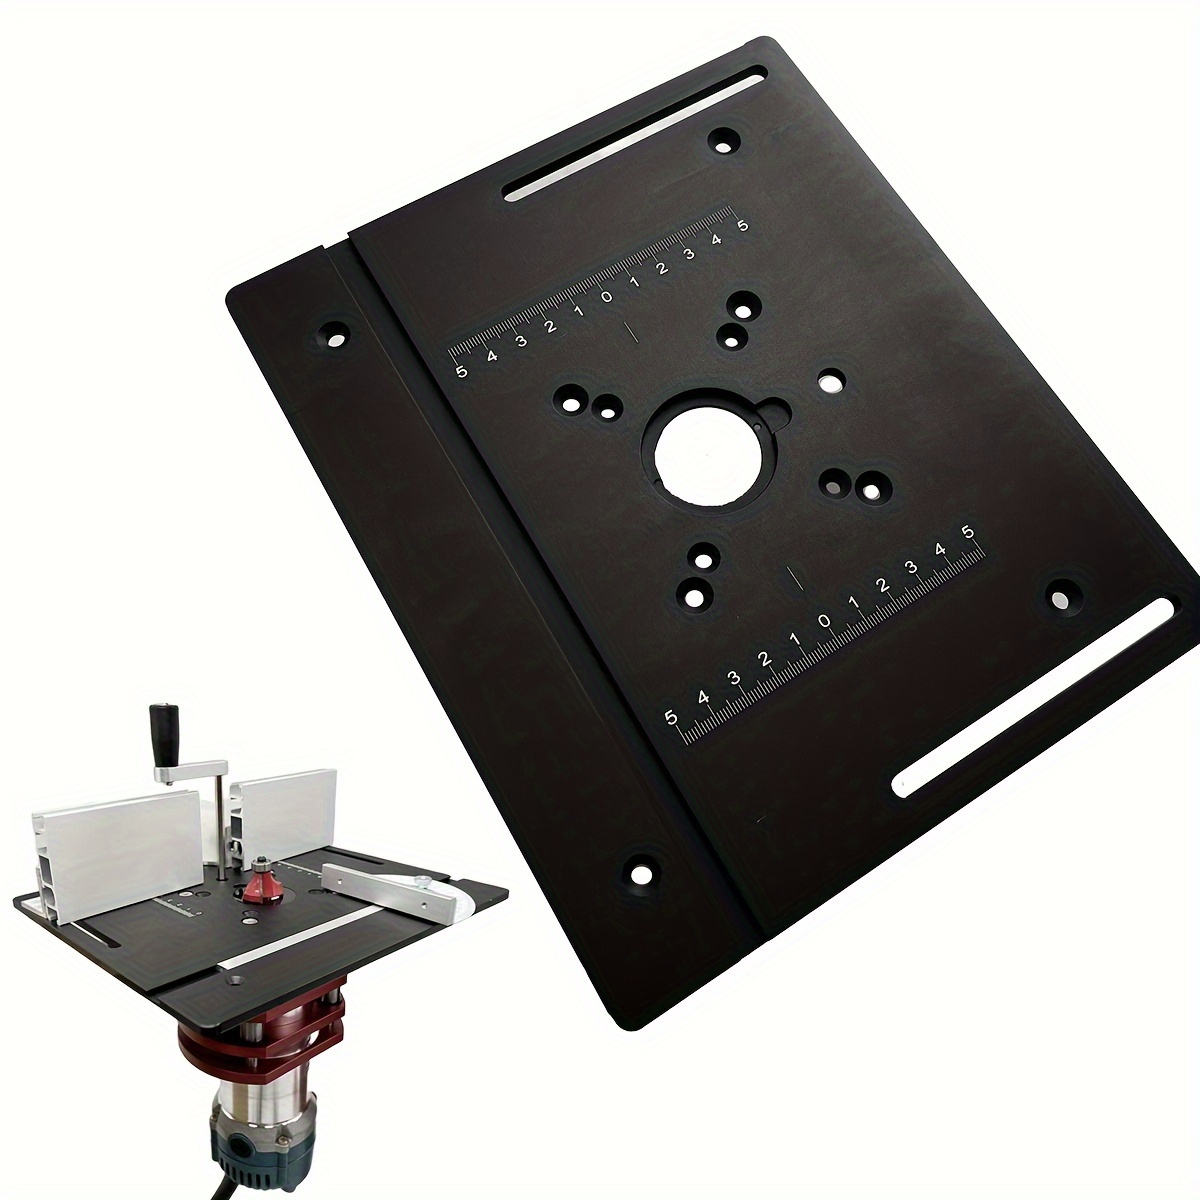 

1pc Aluminum Router Table Insert Plate (9.4''x7.9''/24cm*20cm), Woodworking Flip Board, Trimming Machine Panel, Precision Machinist Tool, Benchtop Router Plate With Scale Markings.